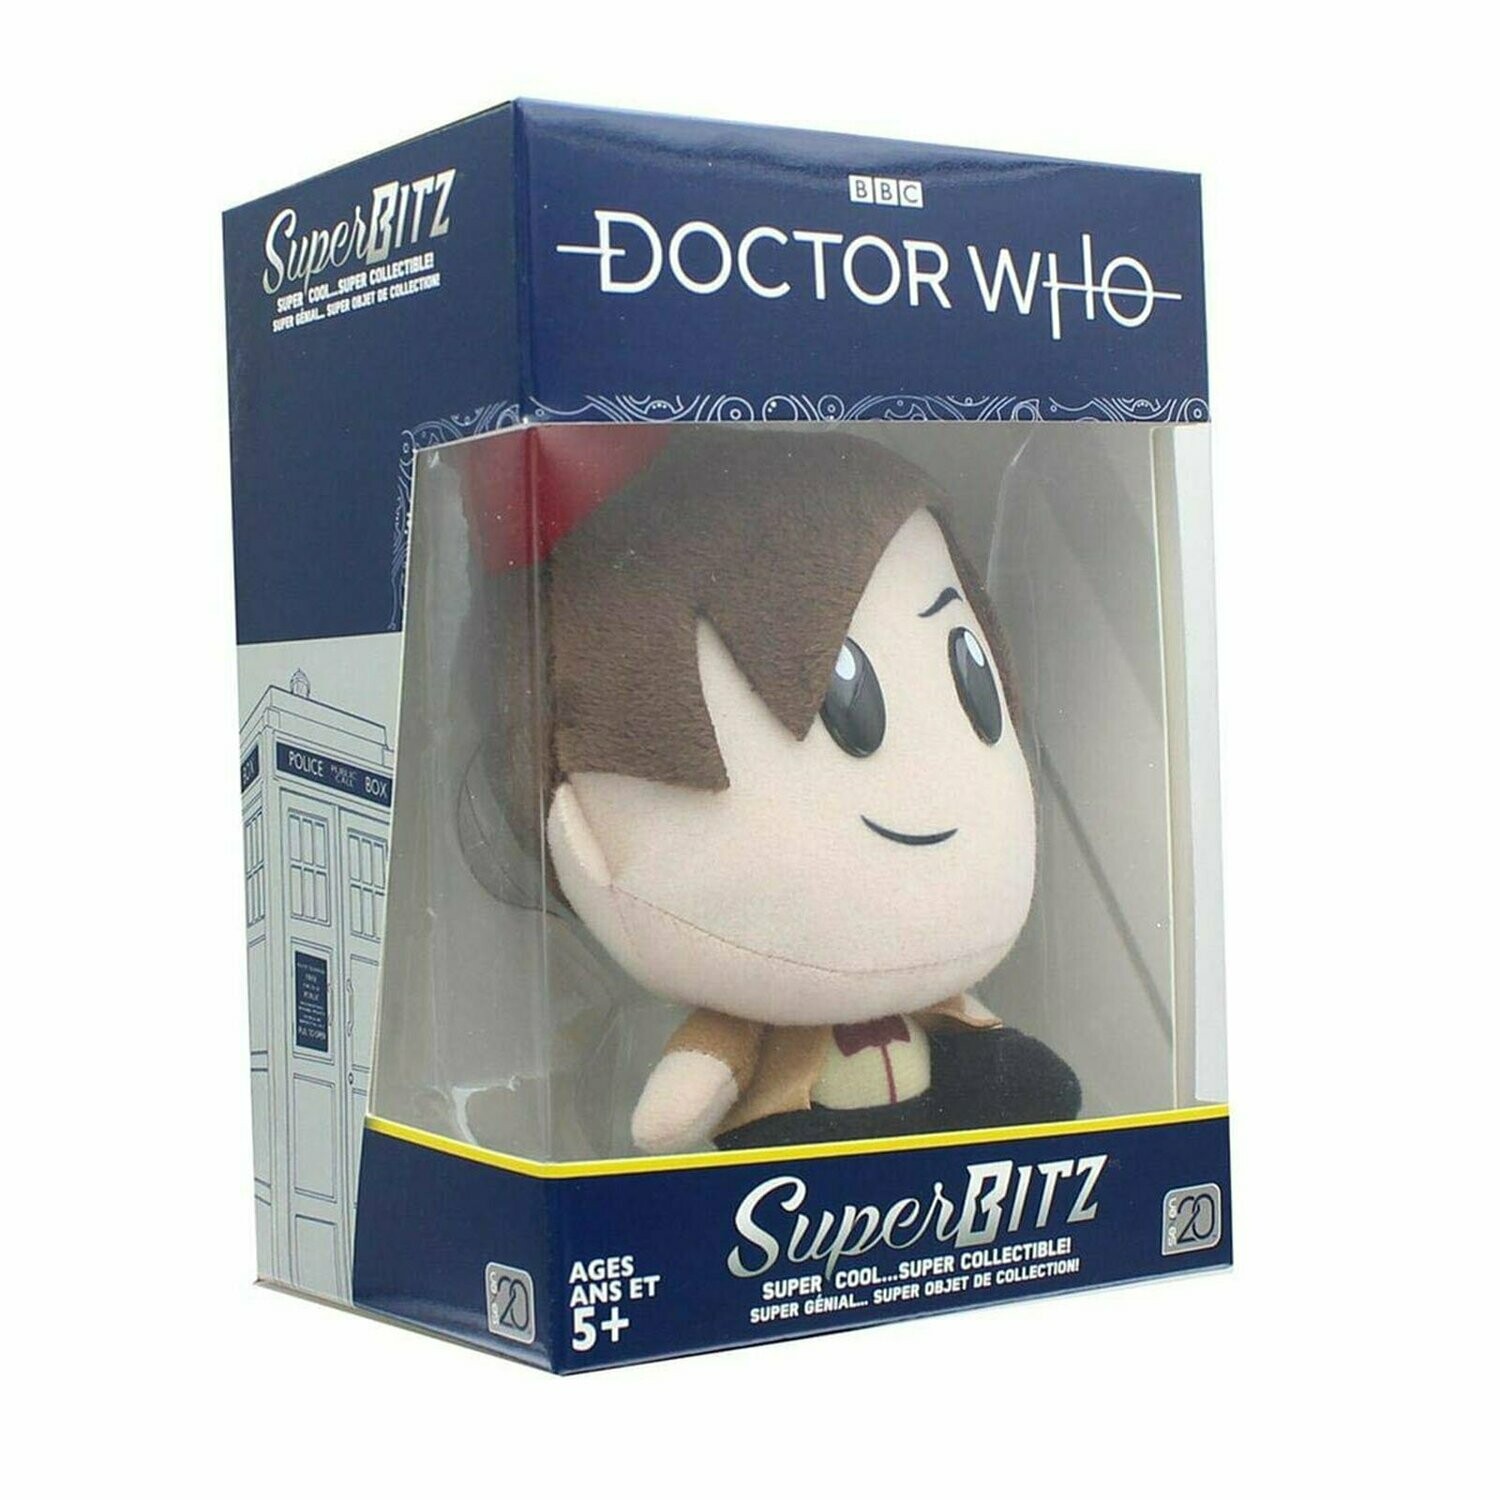 SuperBitz Doctor Who 10th Doctor